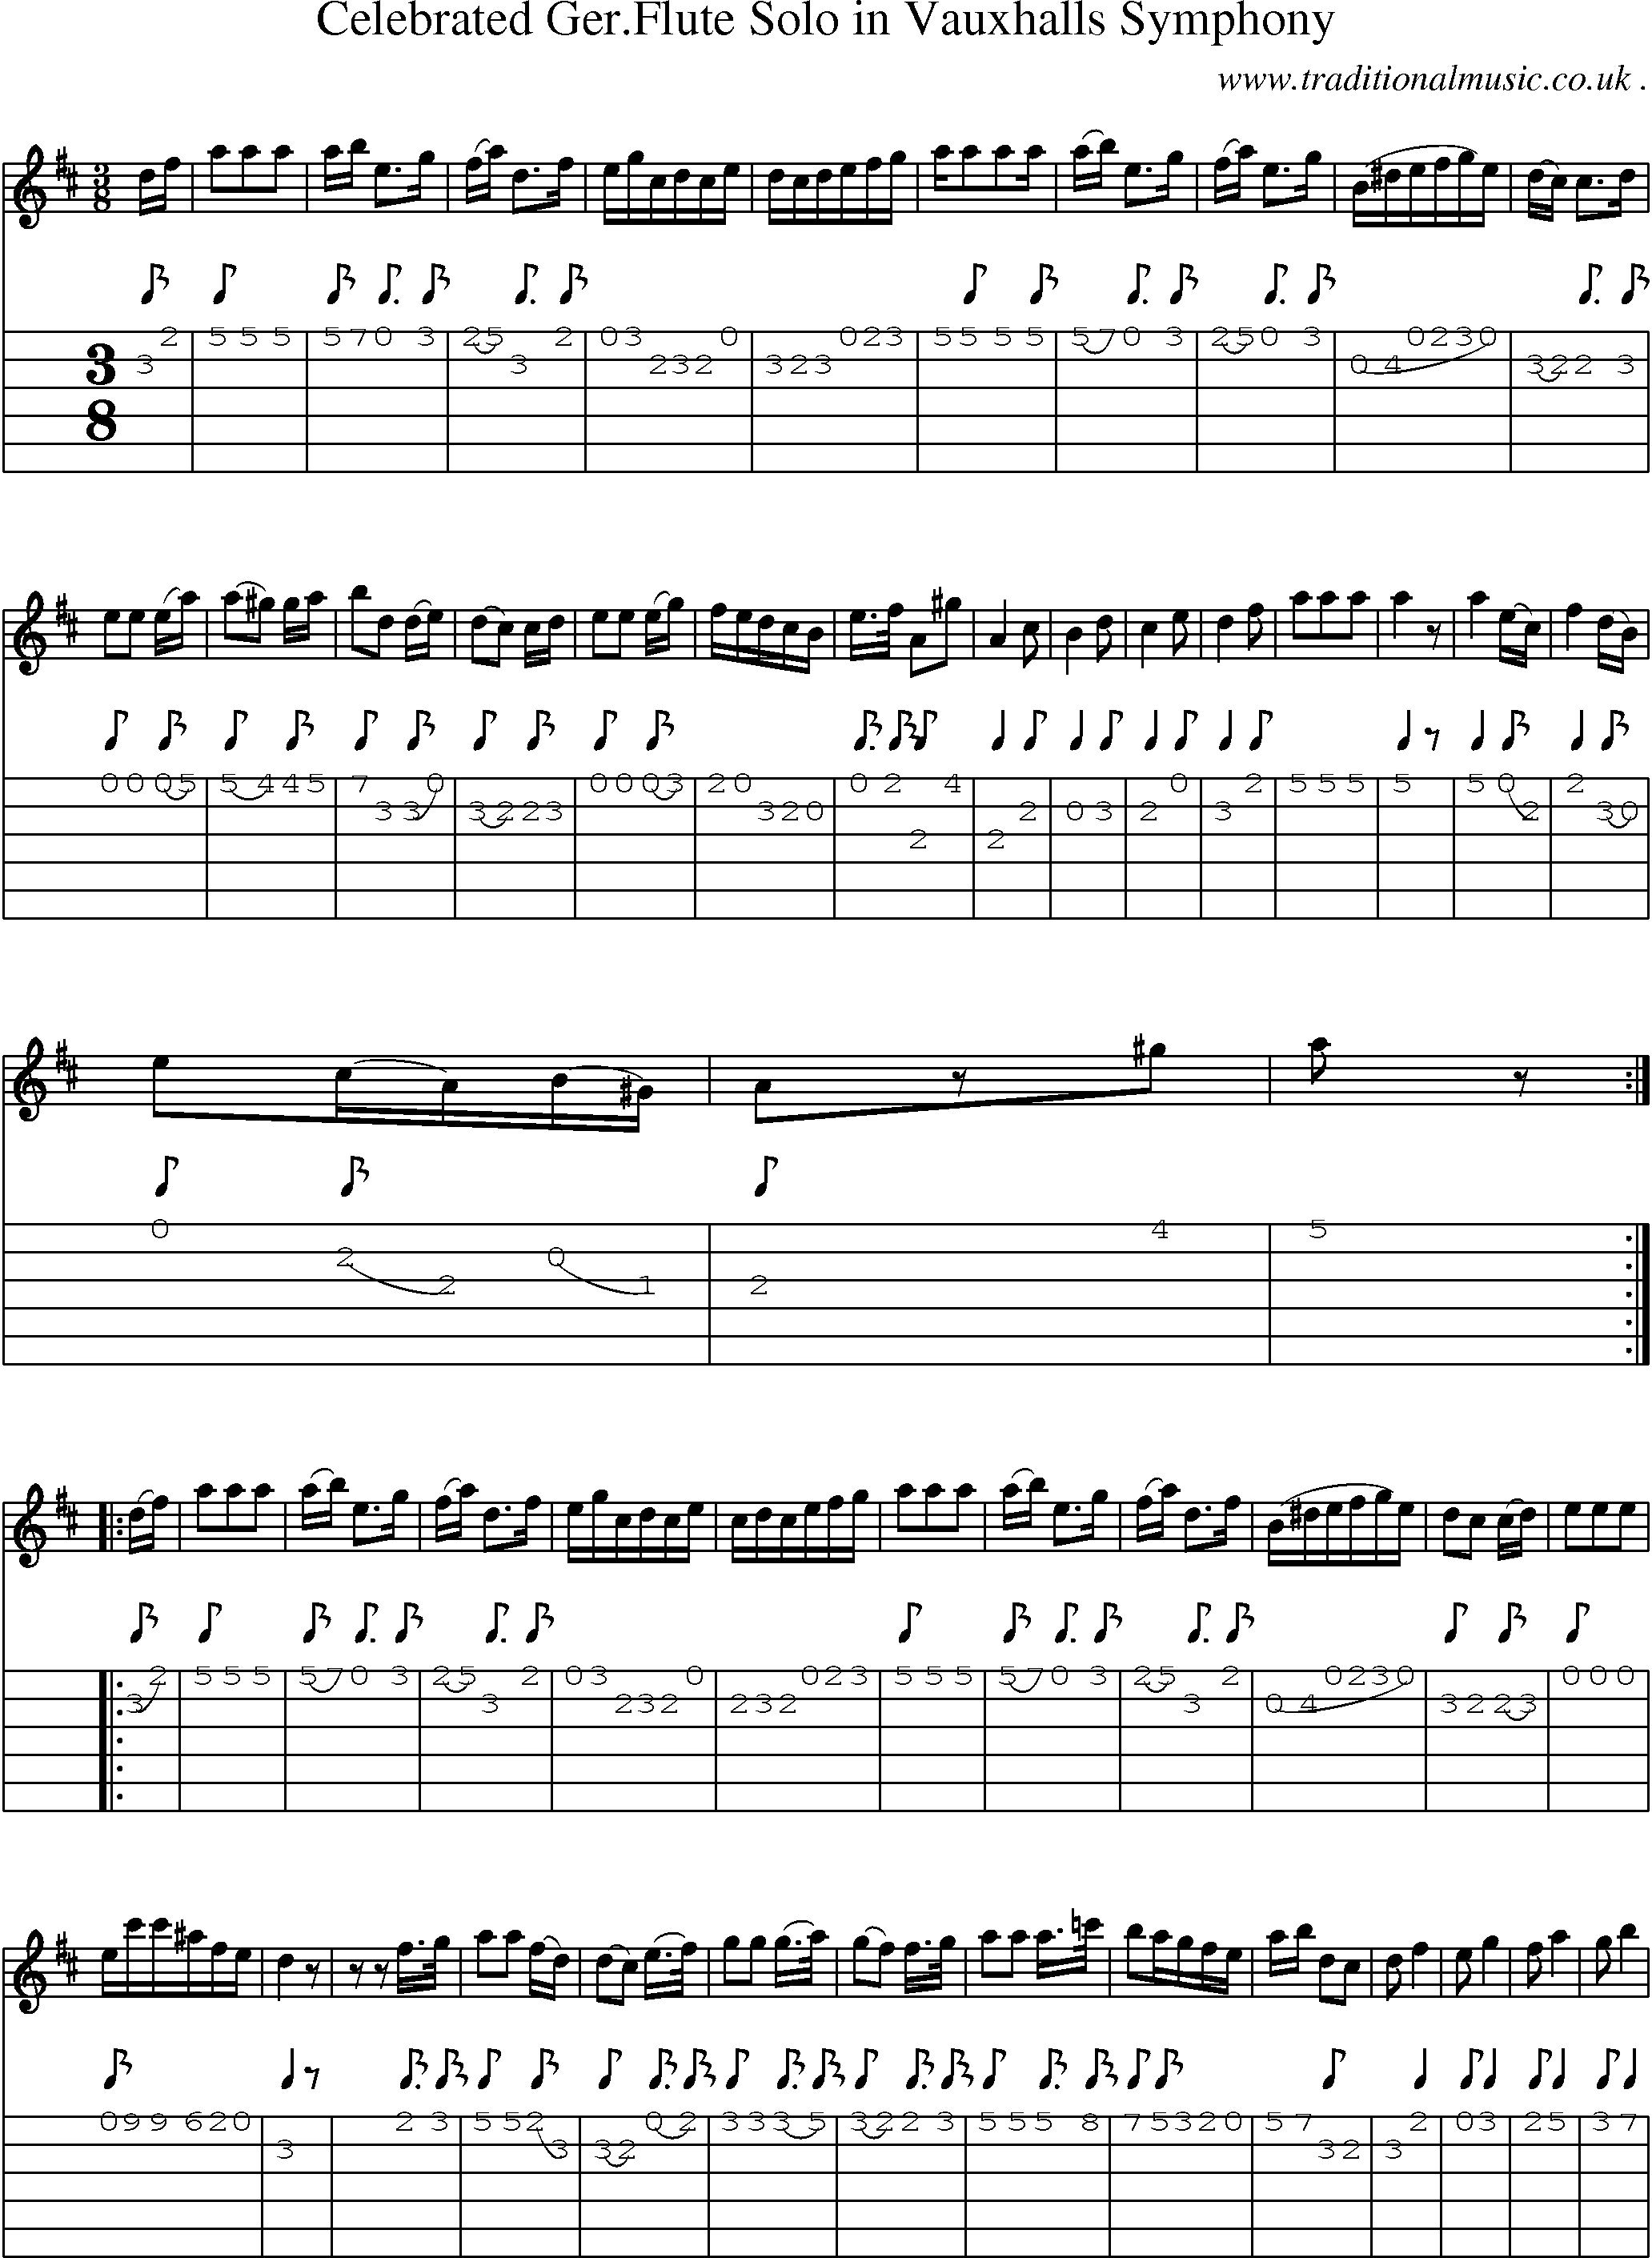 Sheet-Music and Guitar Tabs for Celebrated Gerflute Solo In Vauxhalls Symphony